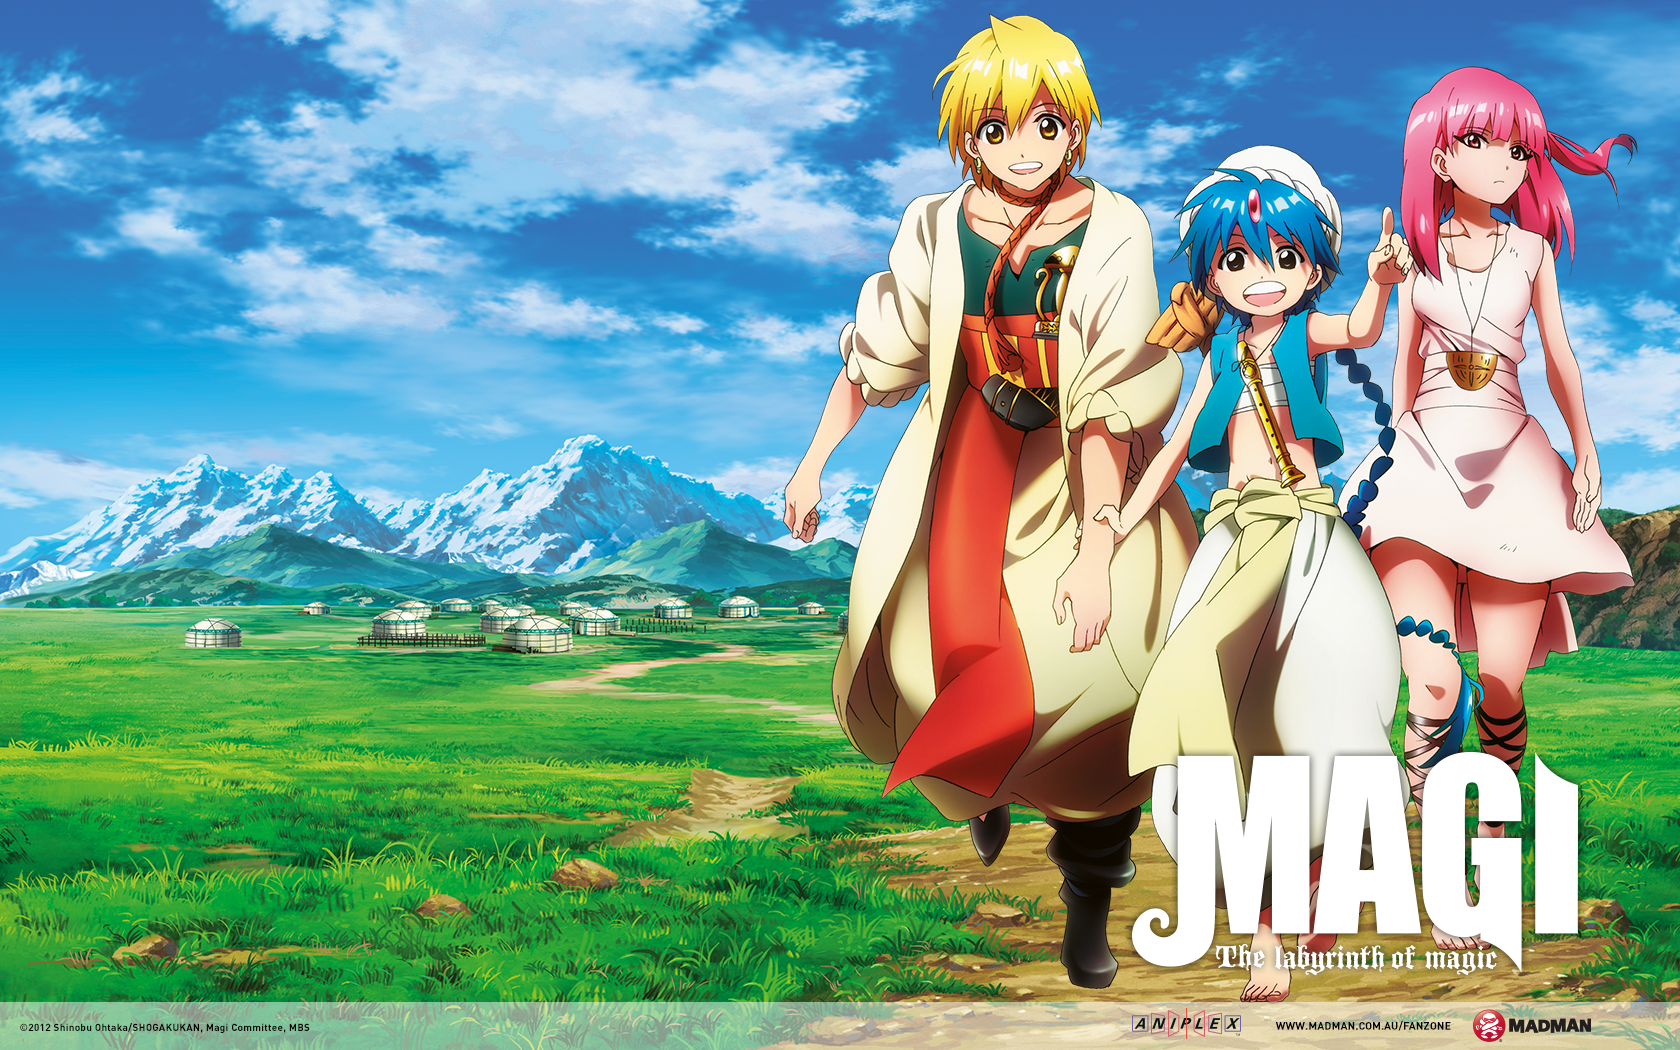 Magi and Its Relations to Real Life Locales Blanket Fort